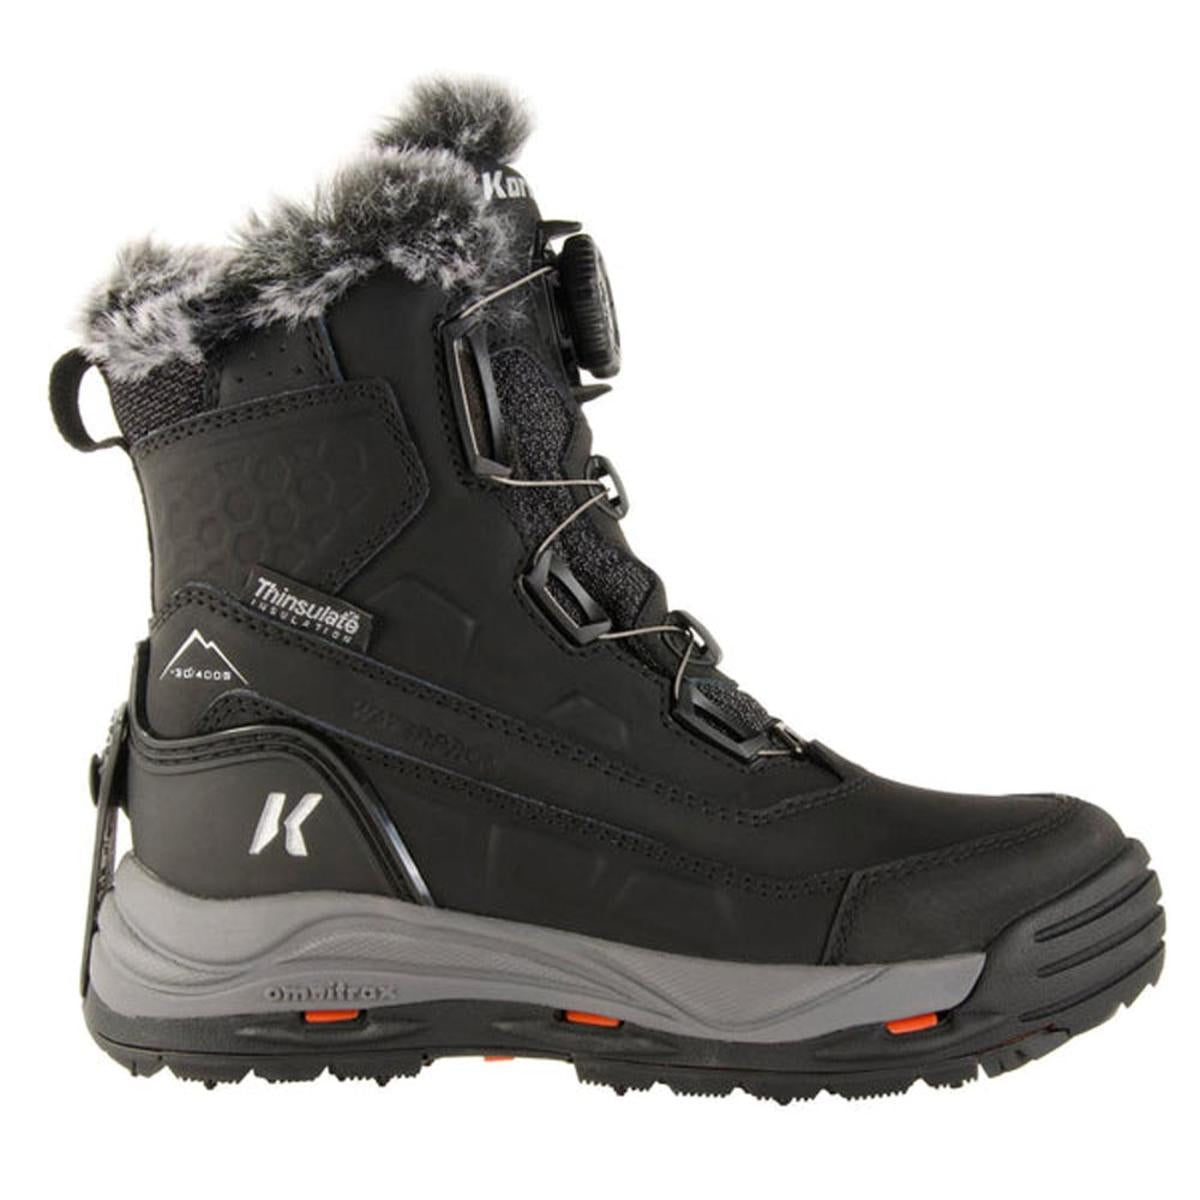 Korkers Women's Snowmageddon Boa Winter Boots with SnowTrac Sole